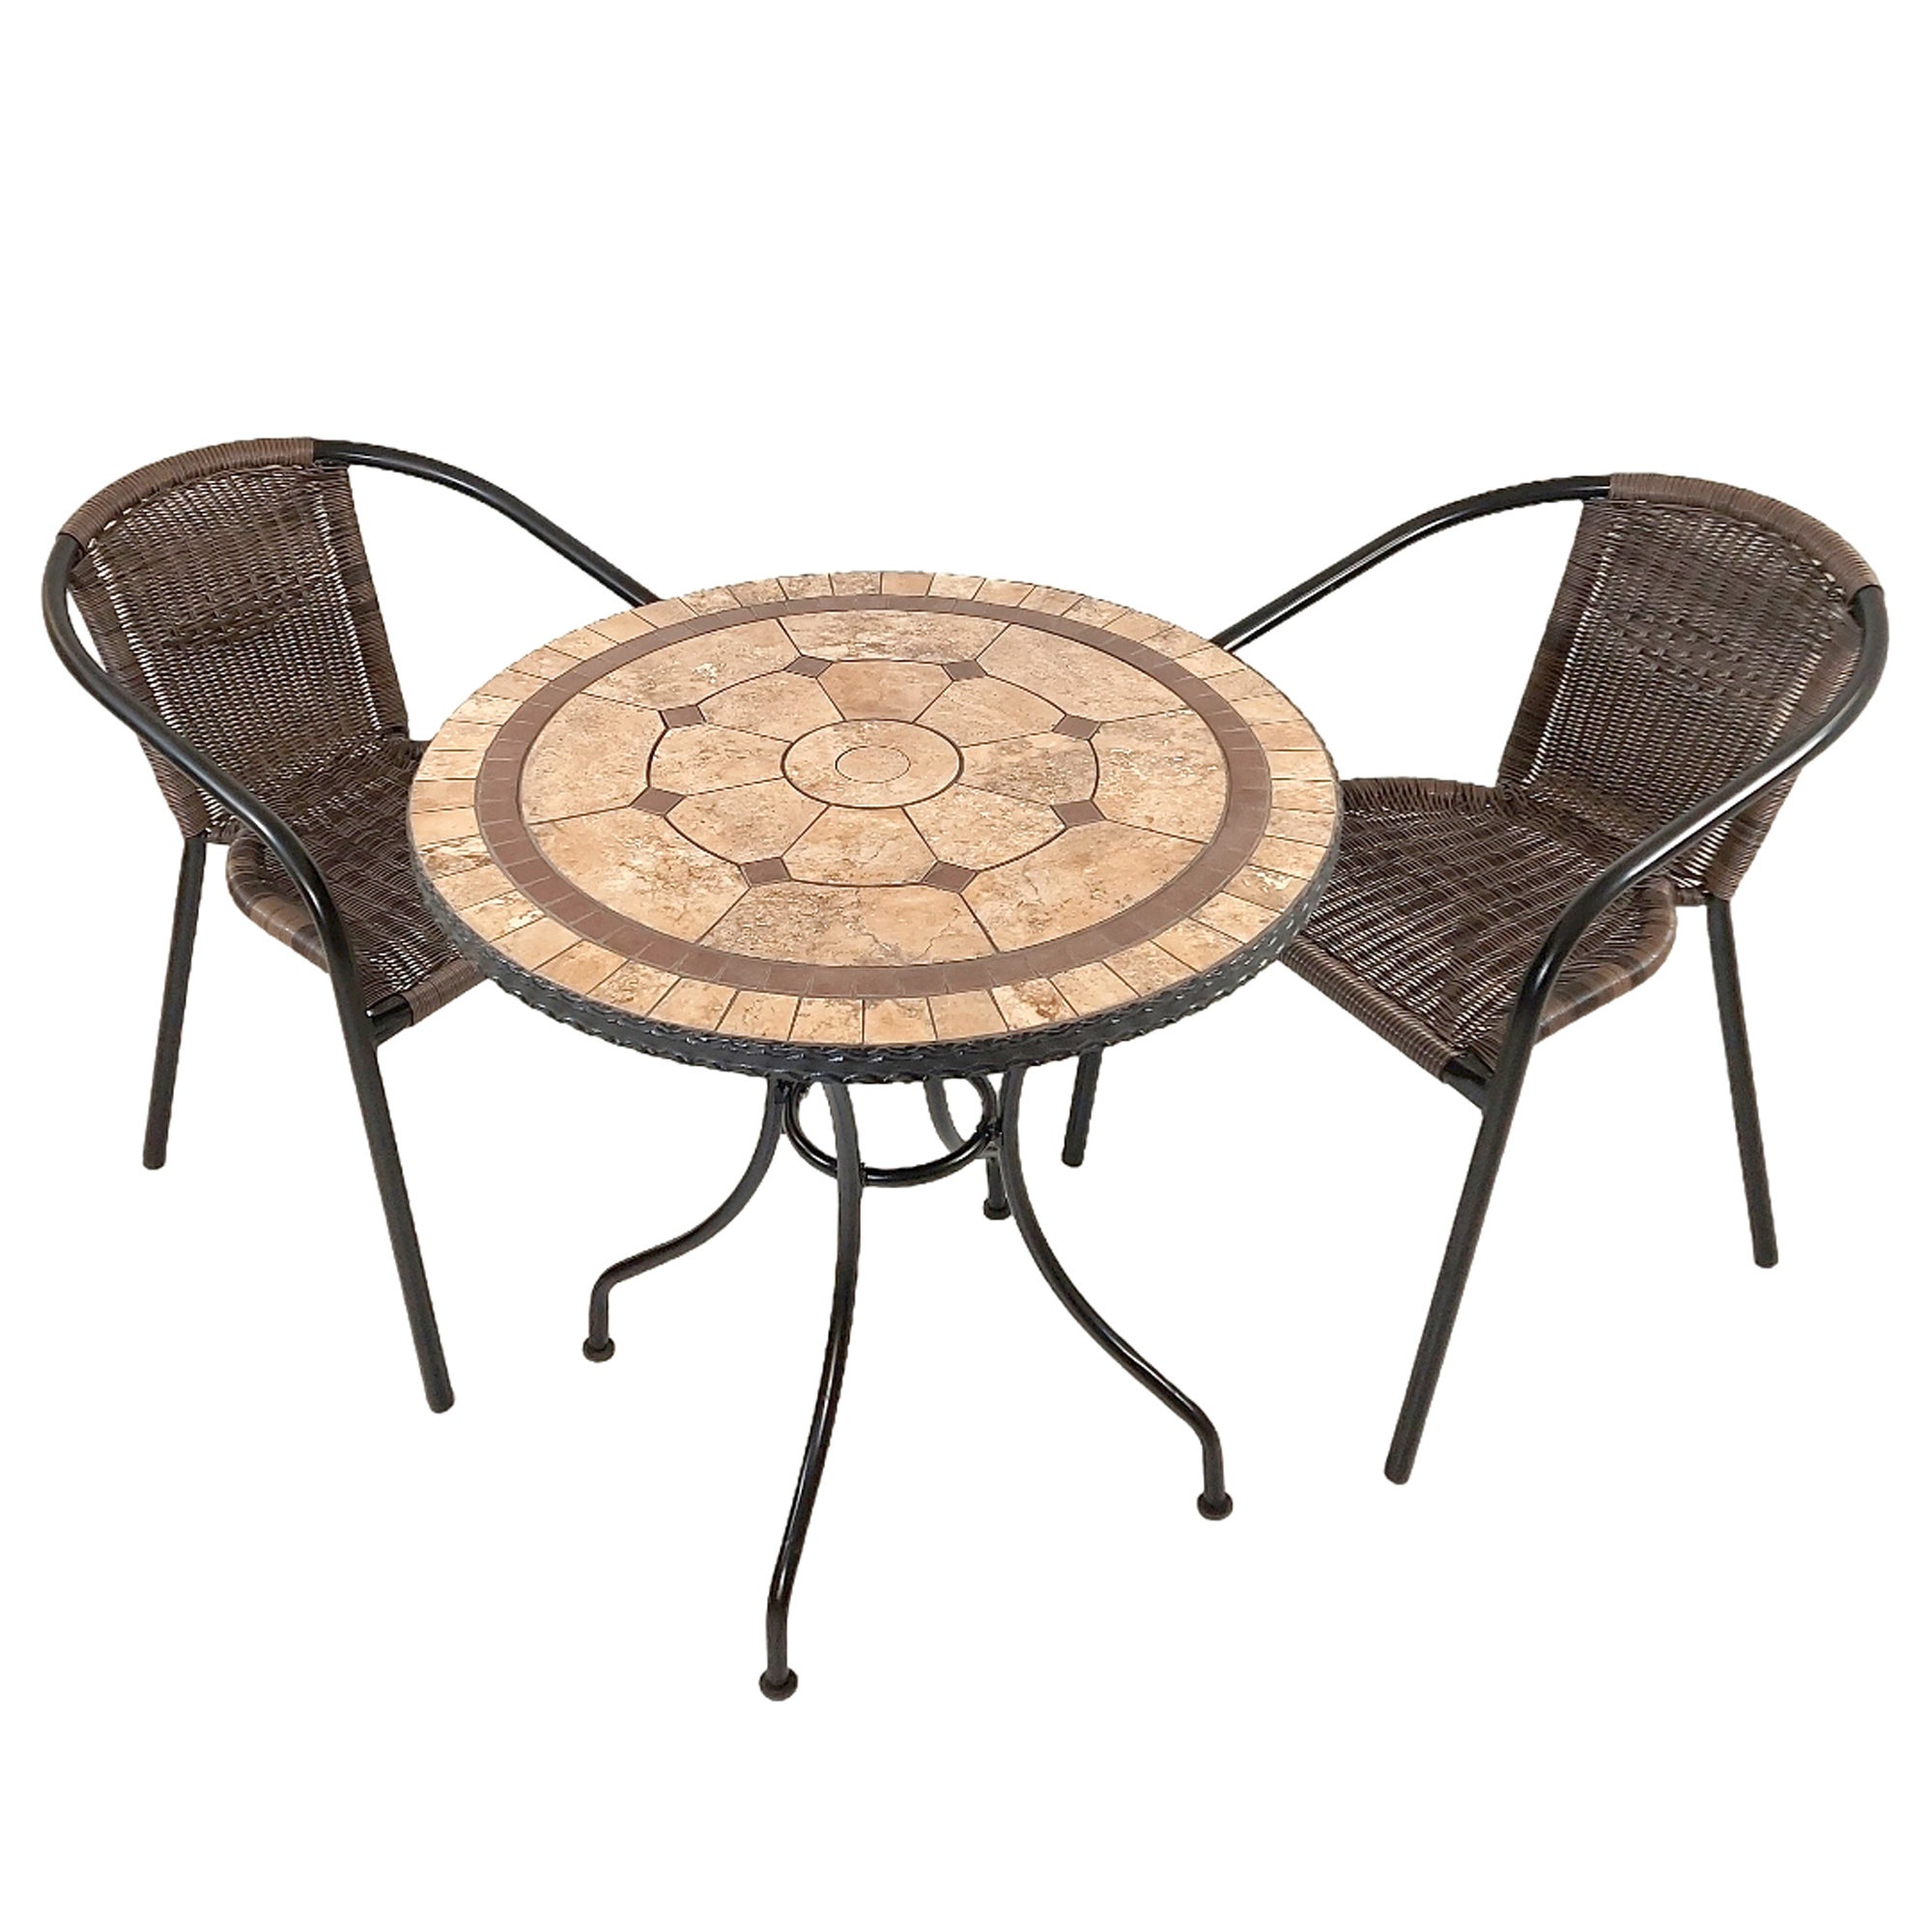 Riverside 76cm Bistro Table with 2 Springdale Chairs Set Brown